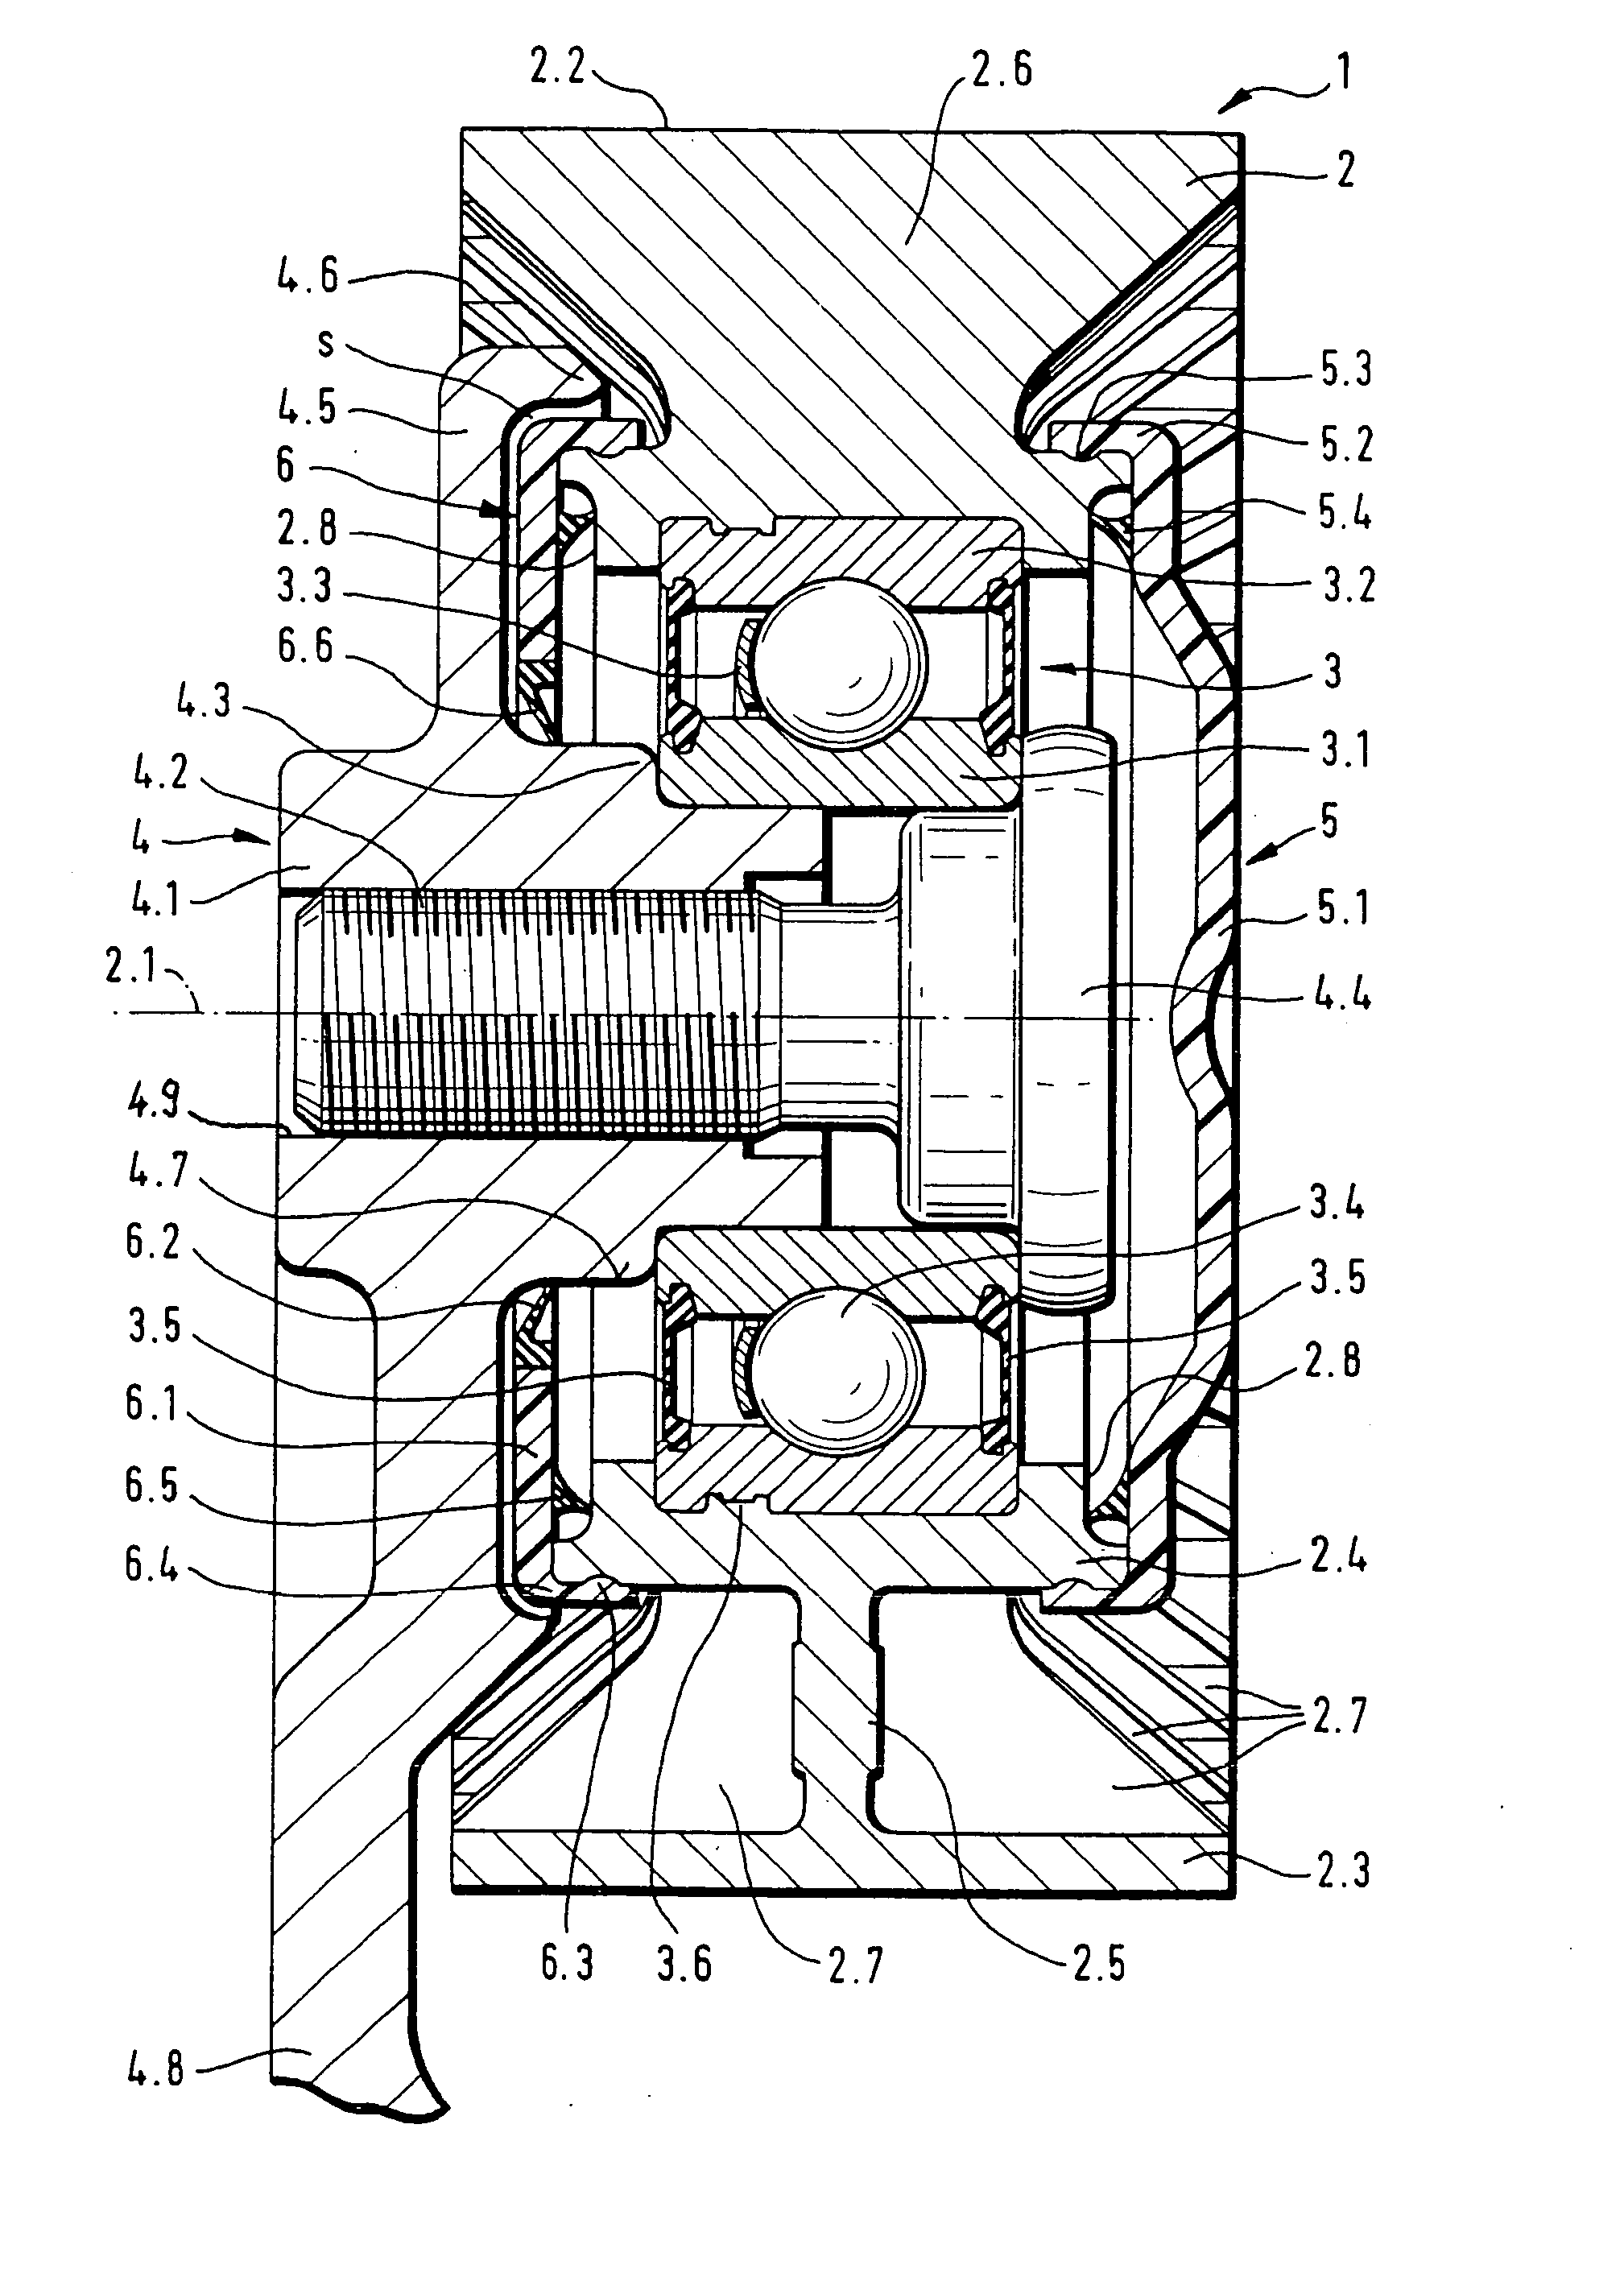 Tensioning or deflection pulley for a belt drive